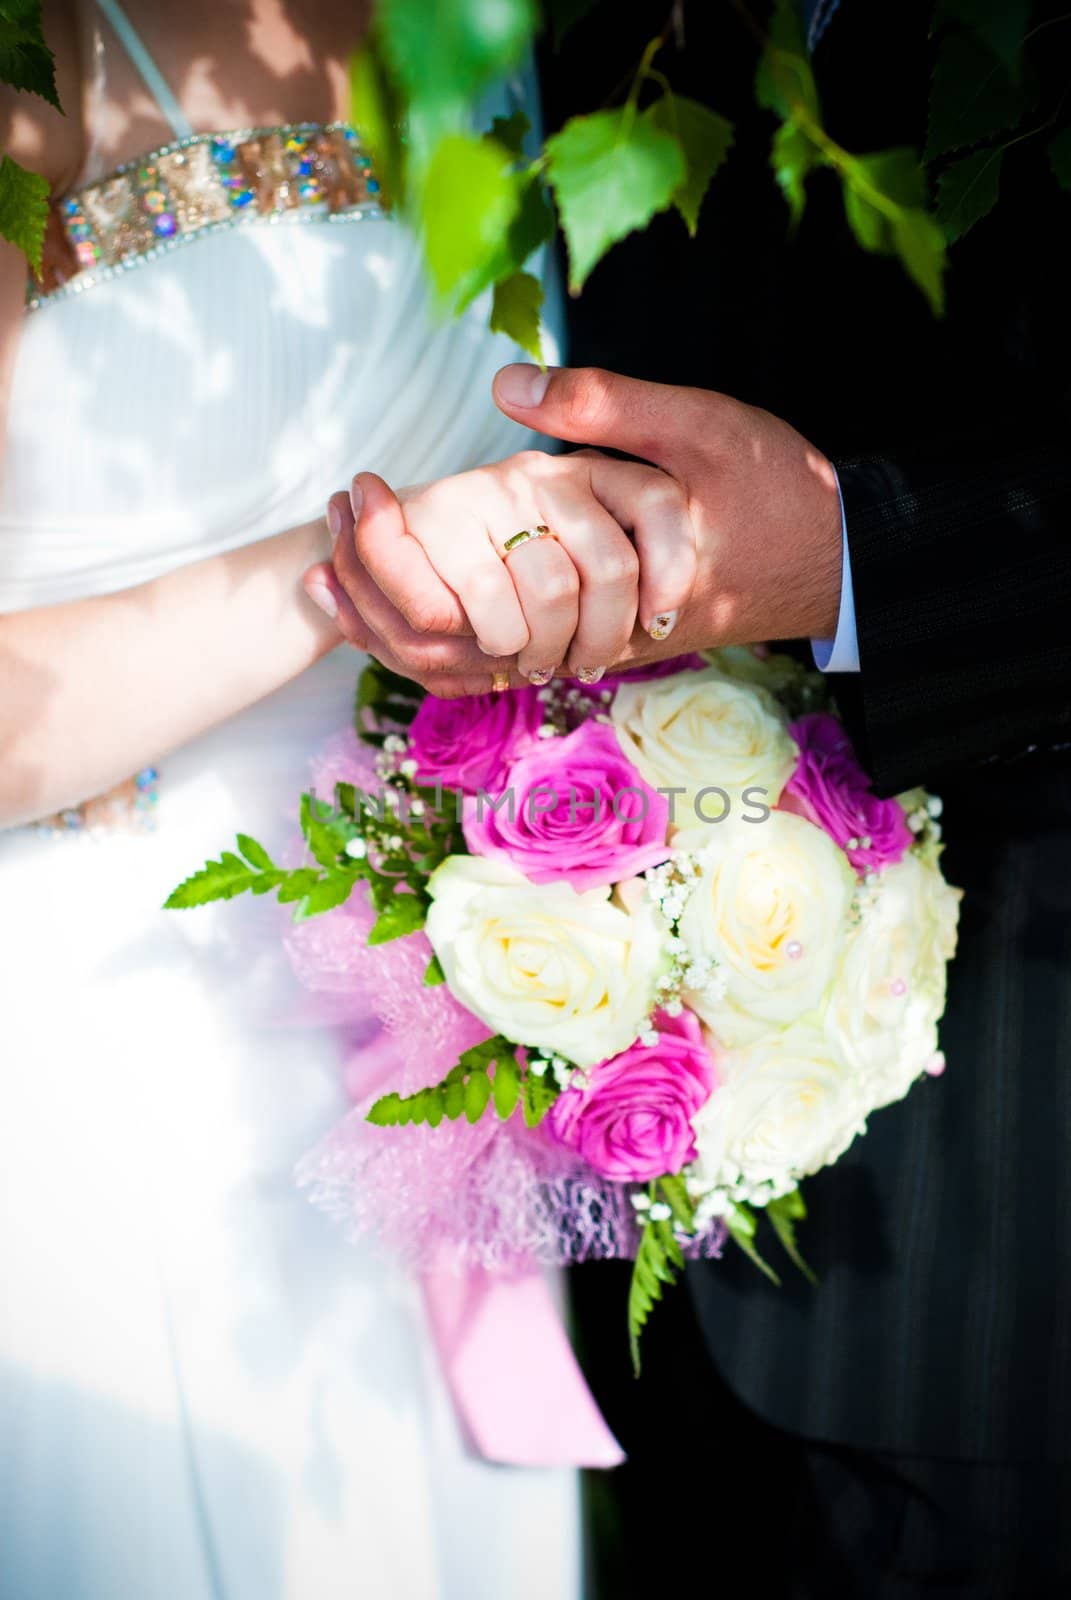 Bridal bouquet of white roses and hands of newlywed